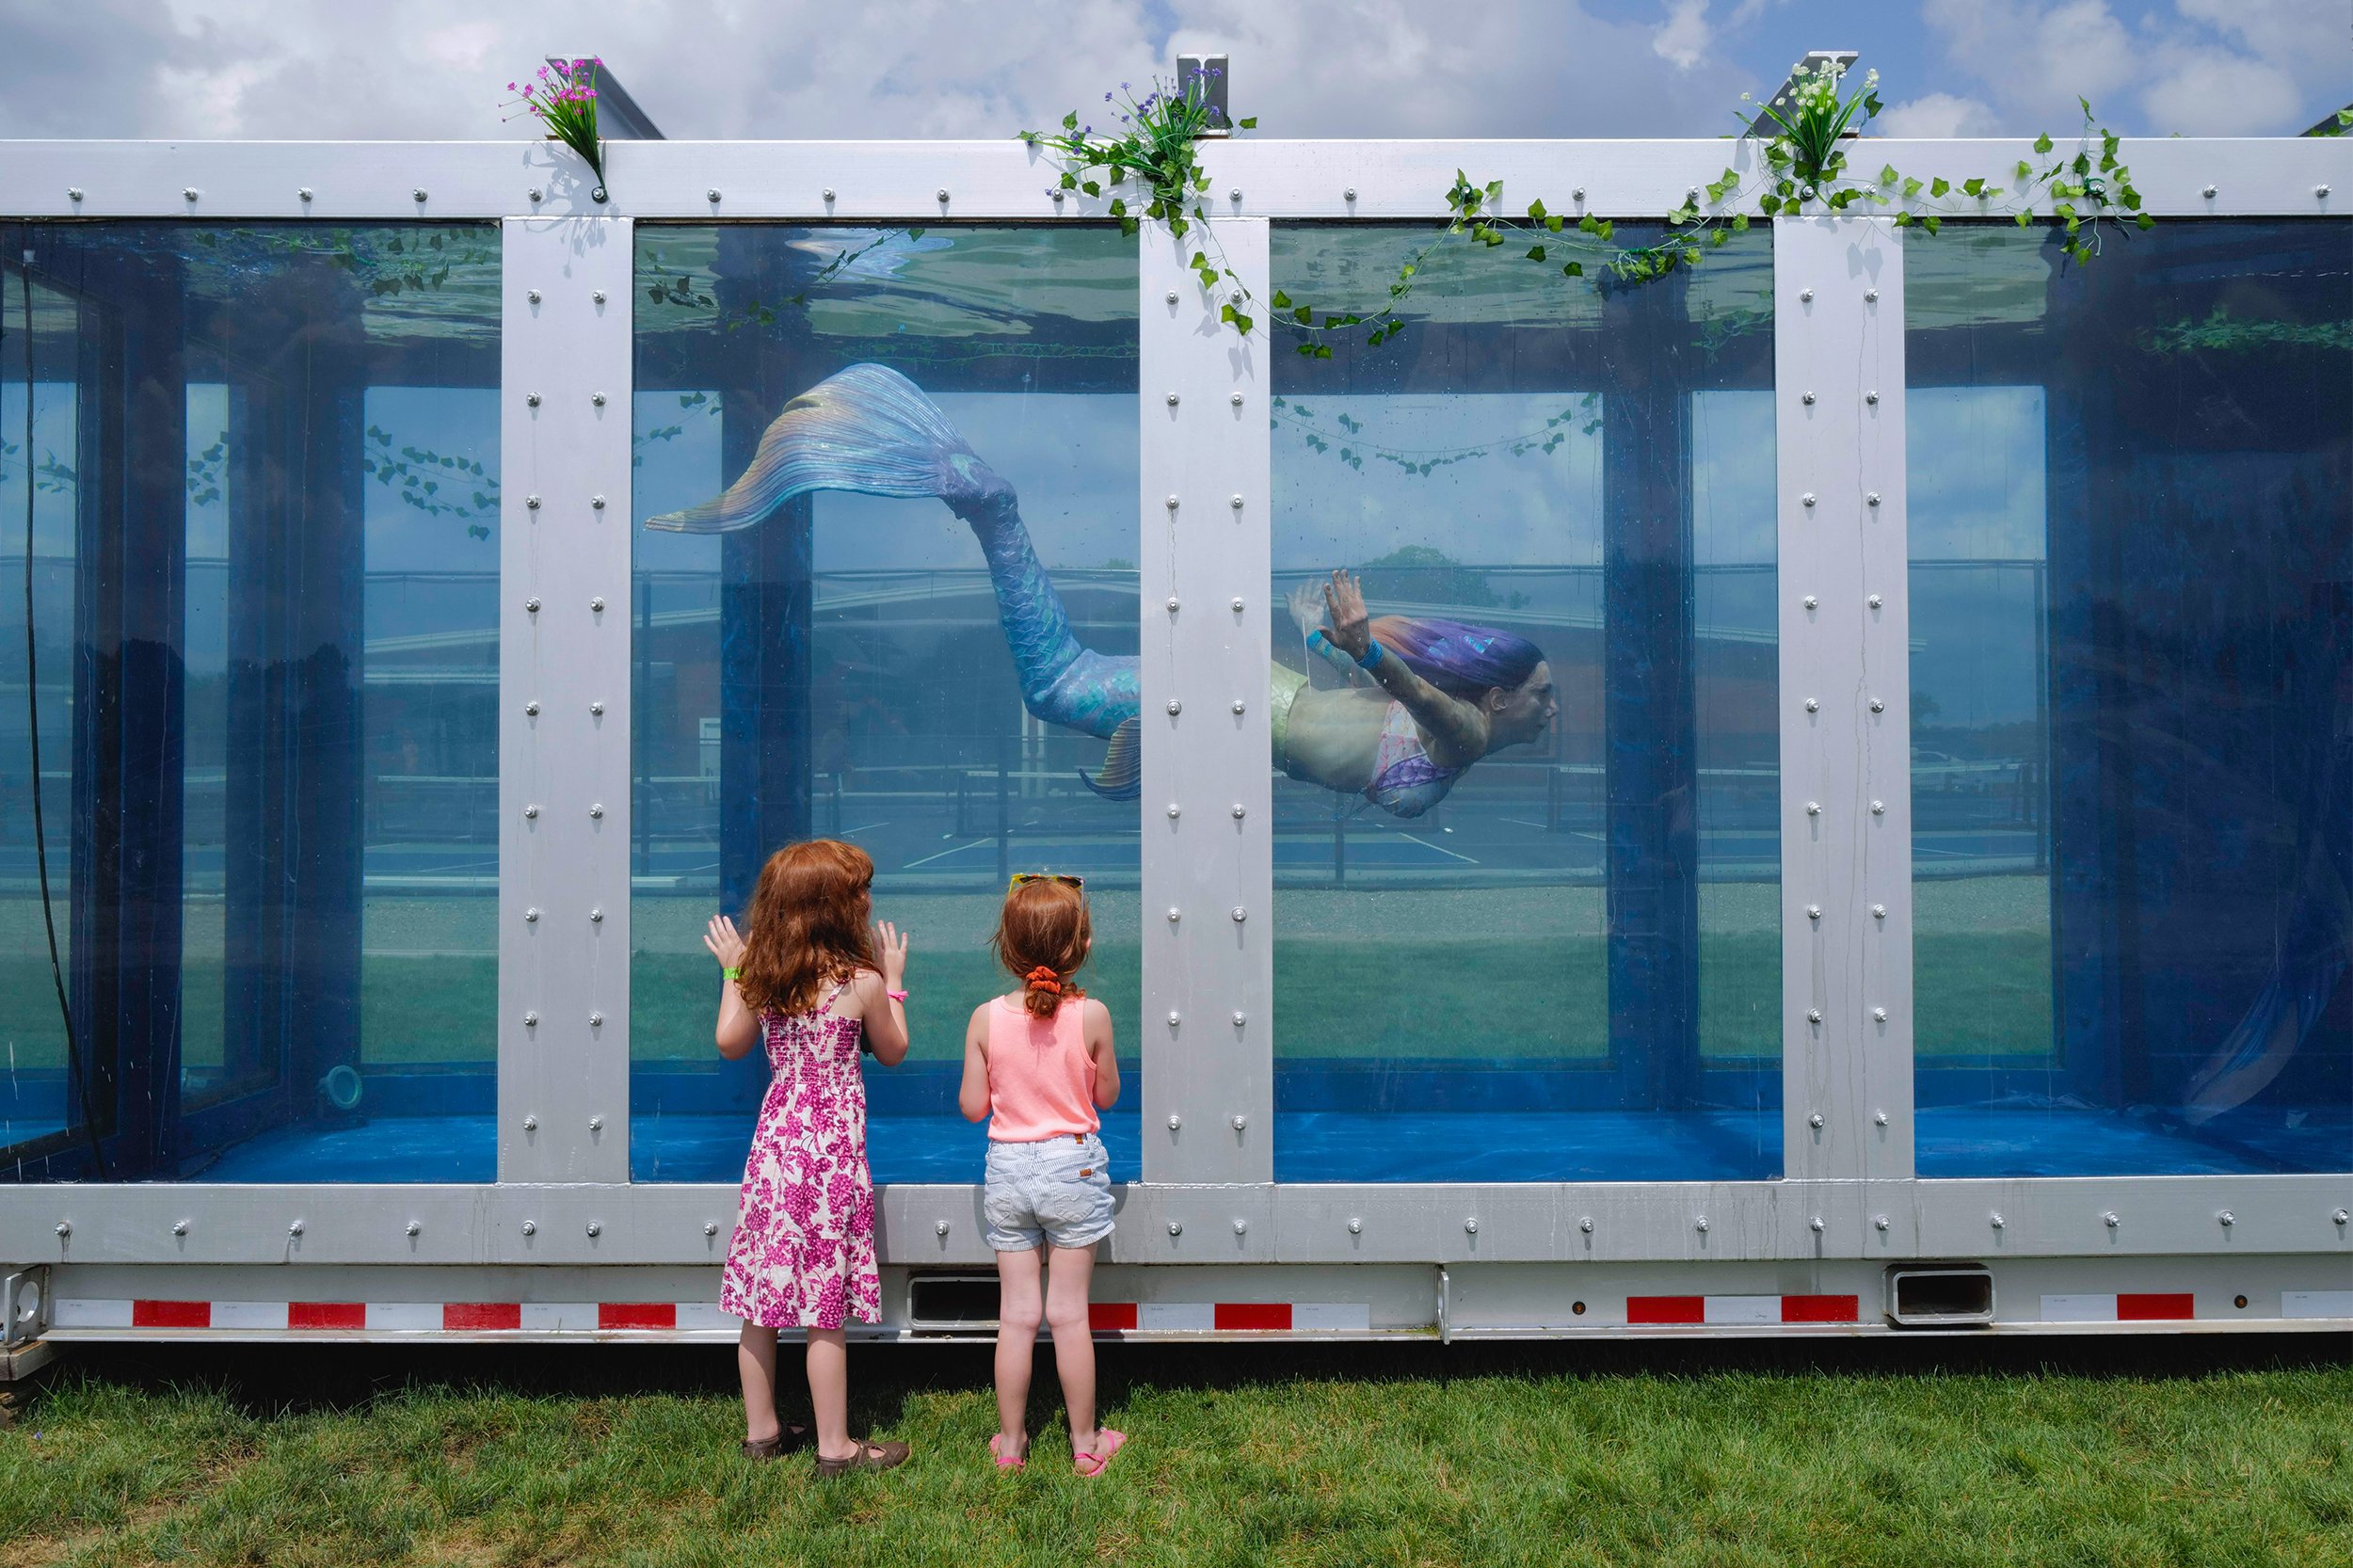  Brinnleigh Payne, 6, and Olivia Payne, 4, watch as the mermaid Seirios Moon swims across the nation’s largest mermaid tank at MerFest International 2021 in South Haven, Michigan on Friday, August 20, 2021. 